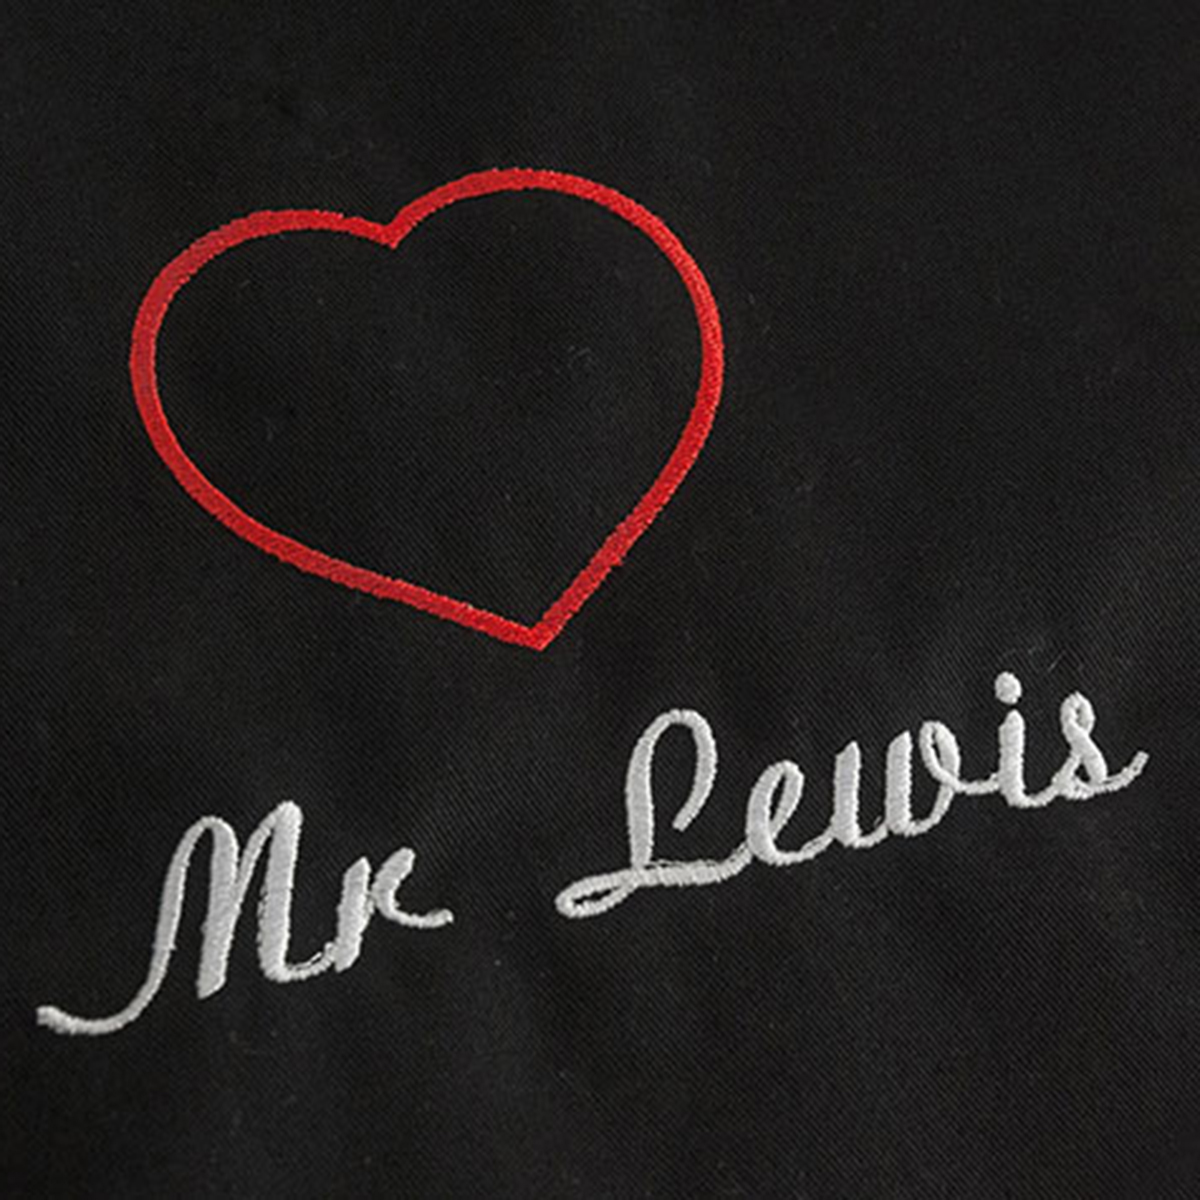 Personalised His and Hers Aprons